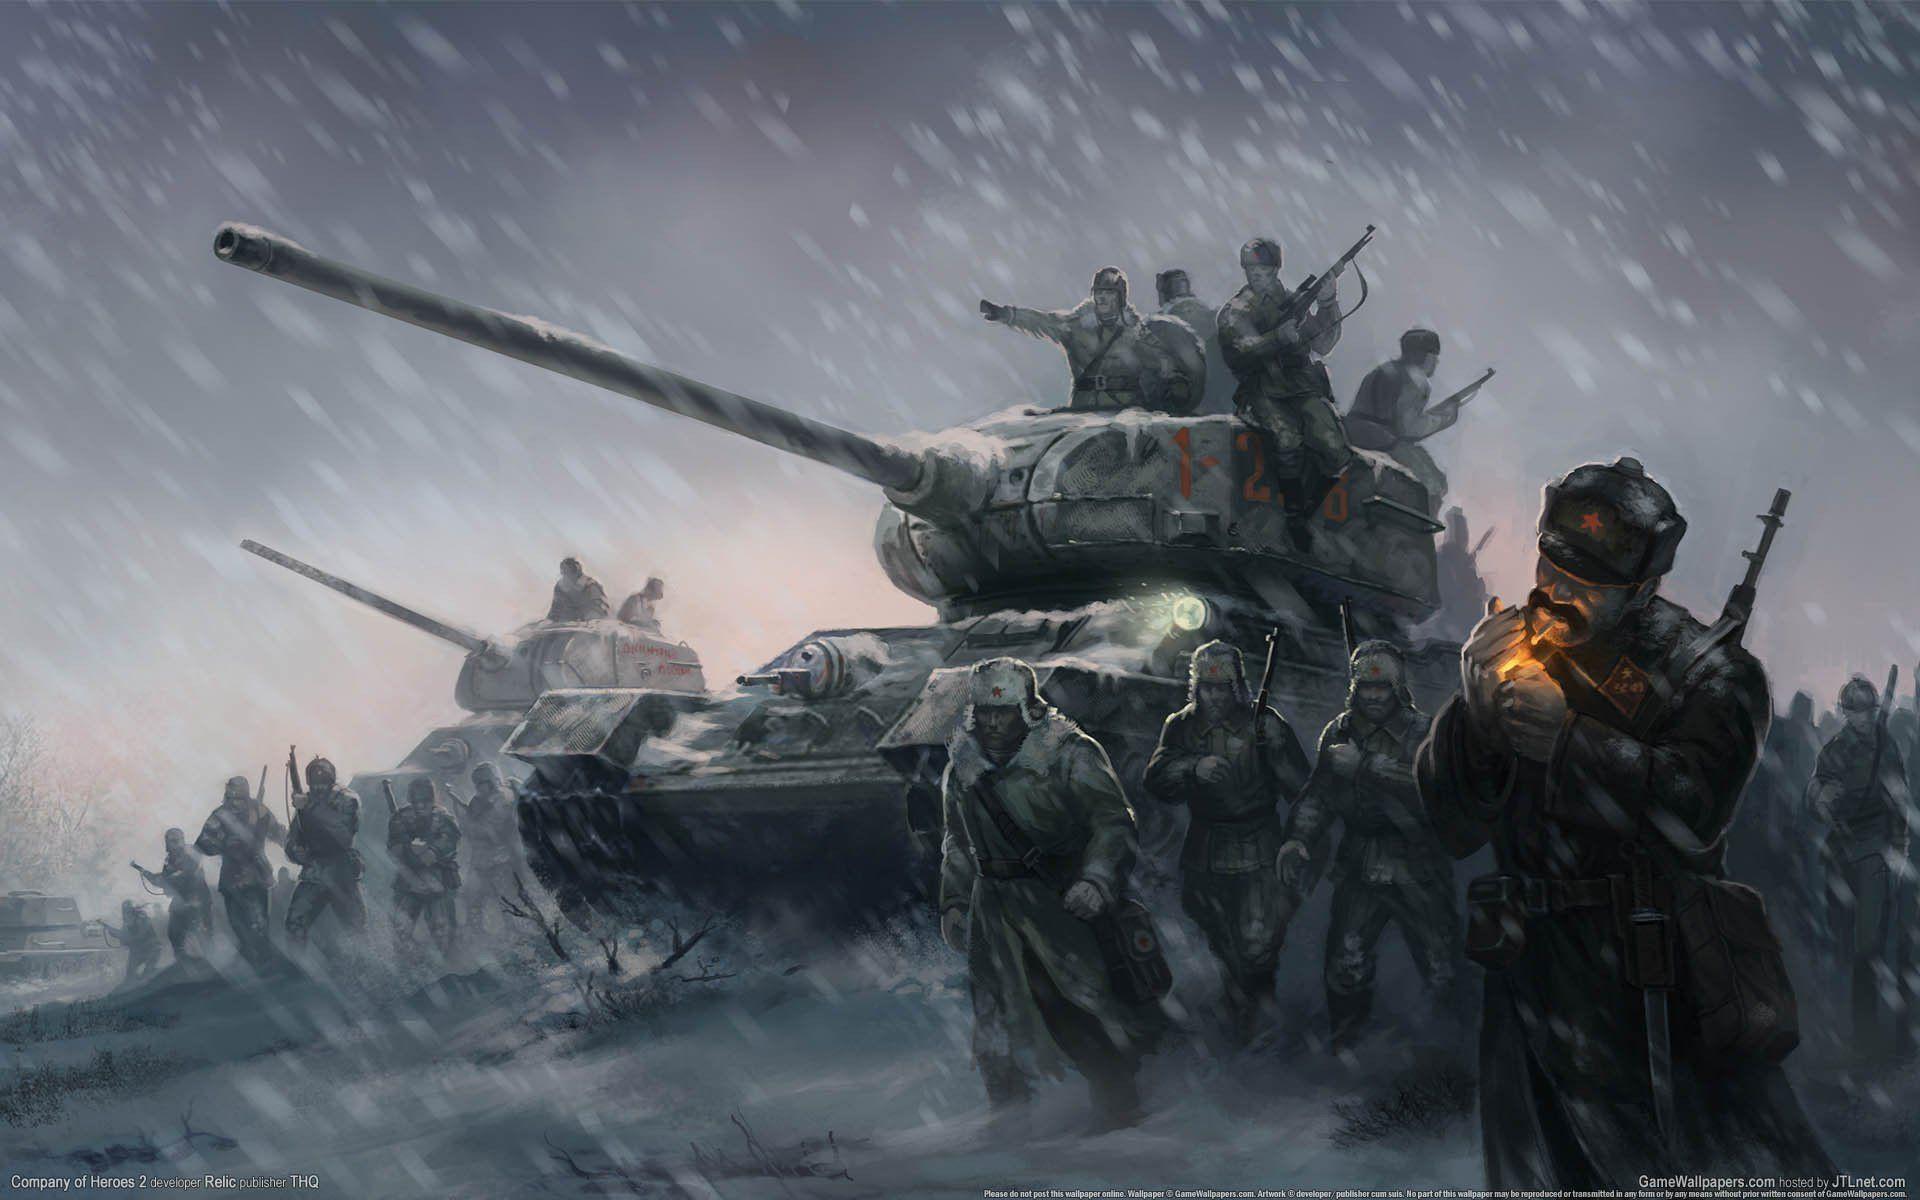 company of heroes 2 game wallpaper world war 2 ww2 tanks soldiers